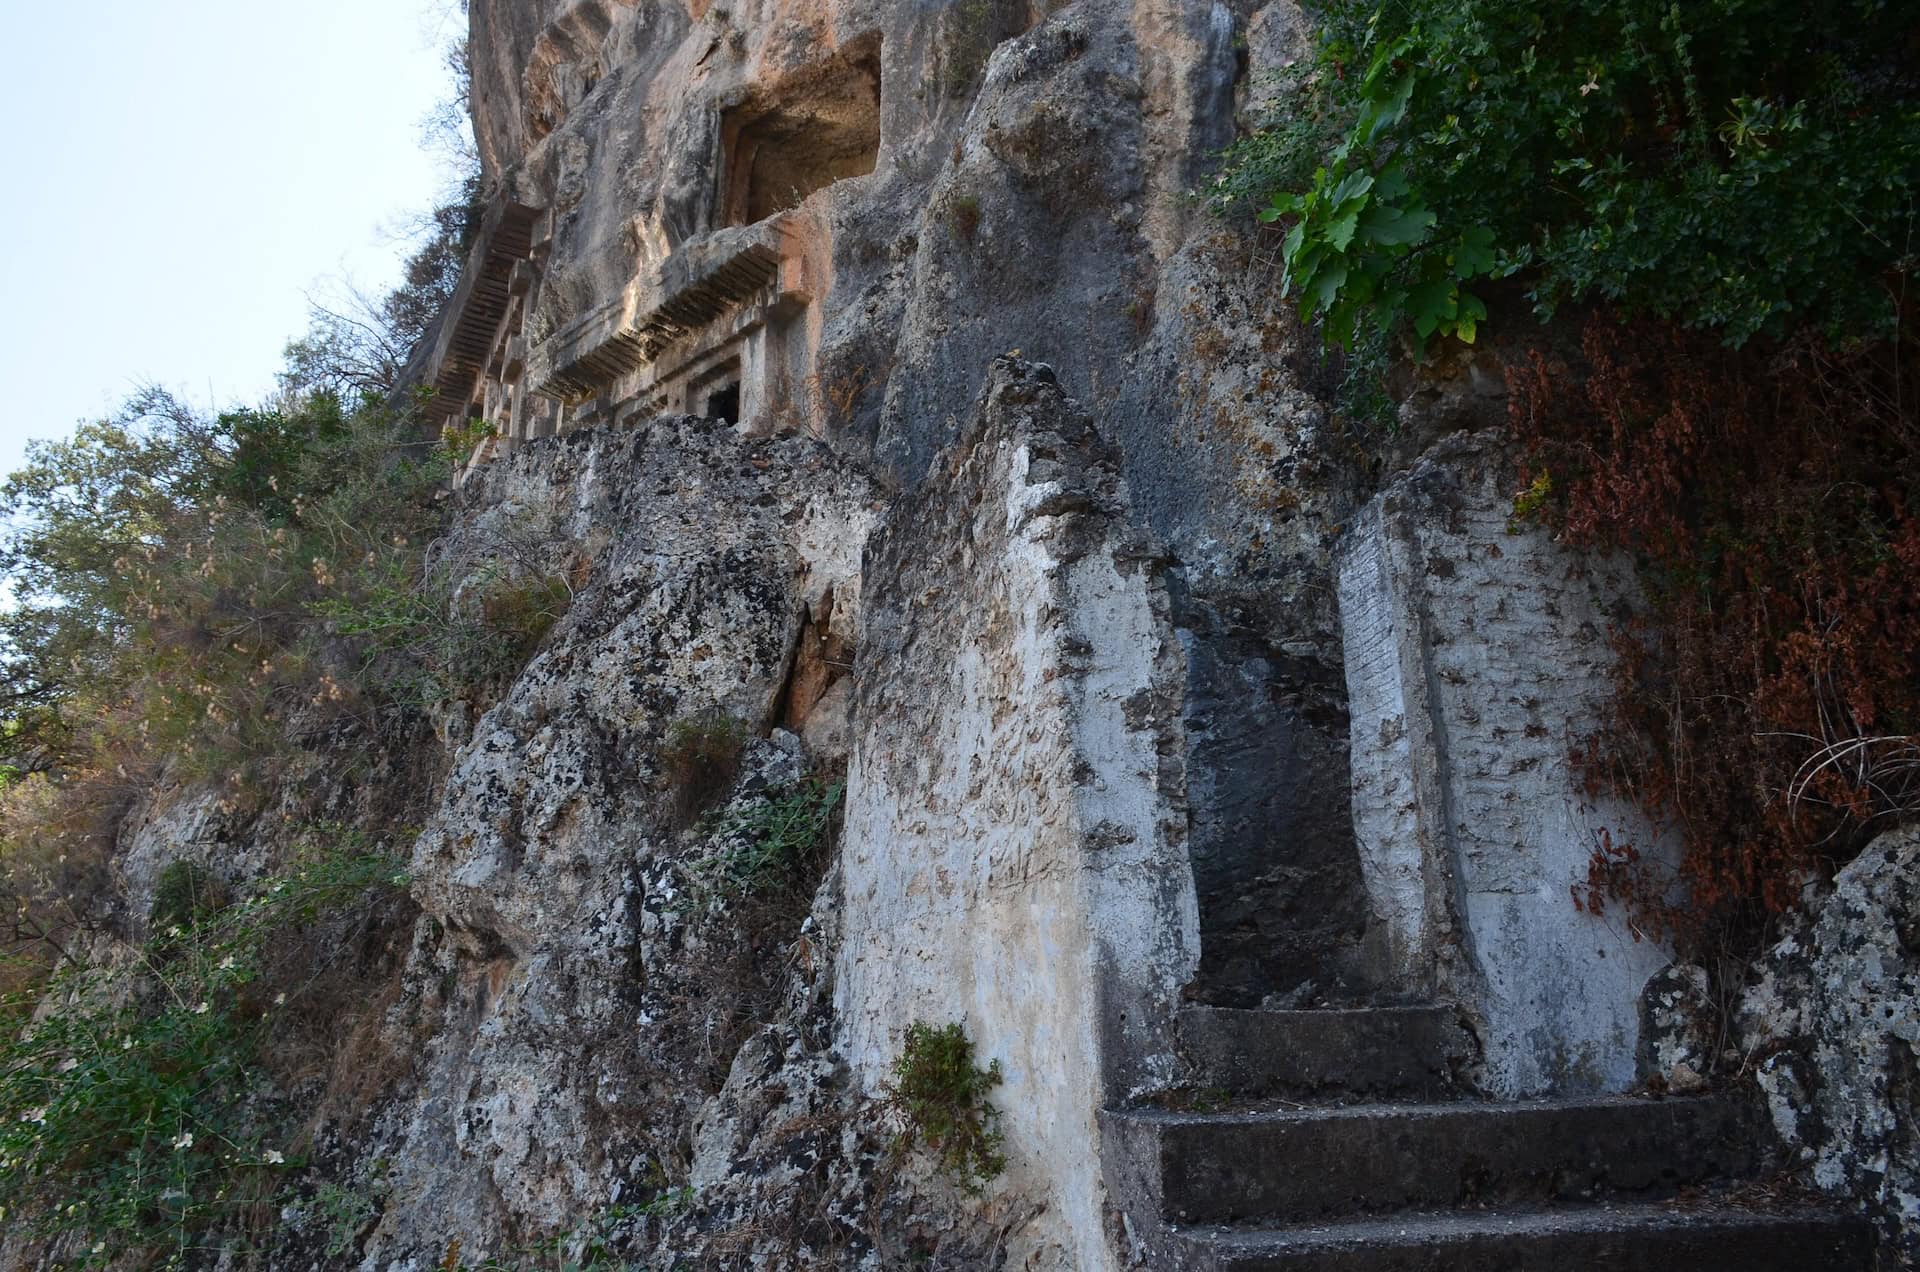 Stairs to the upper level tombs at the Amyntas Rock Tombs